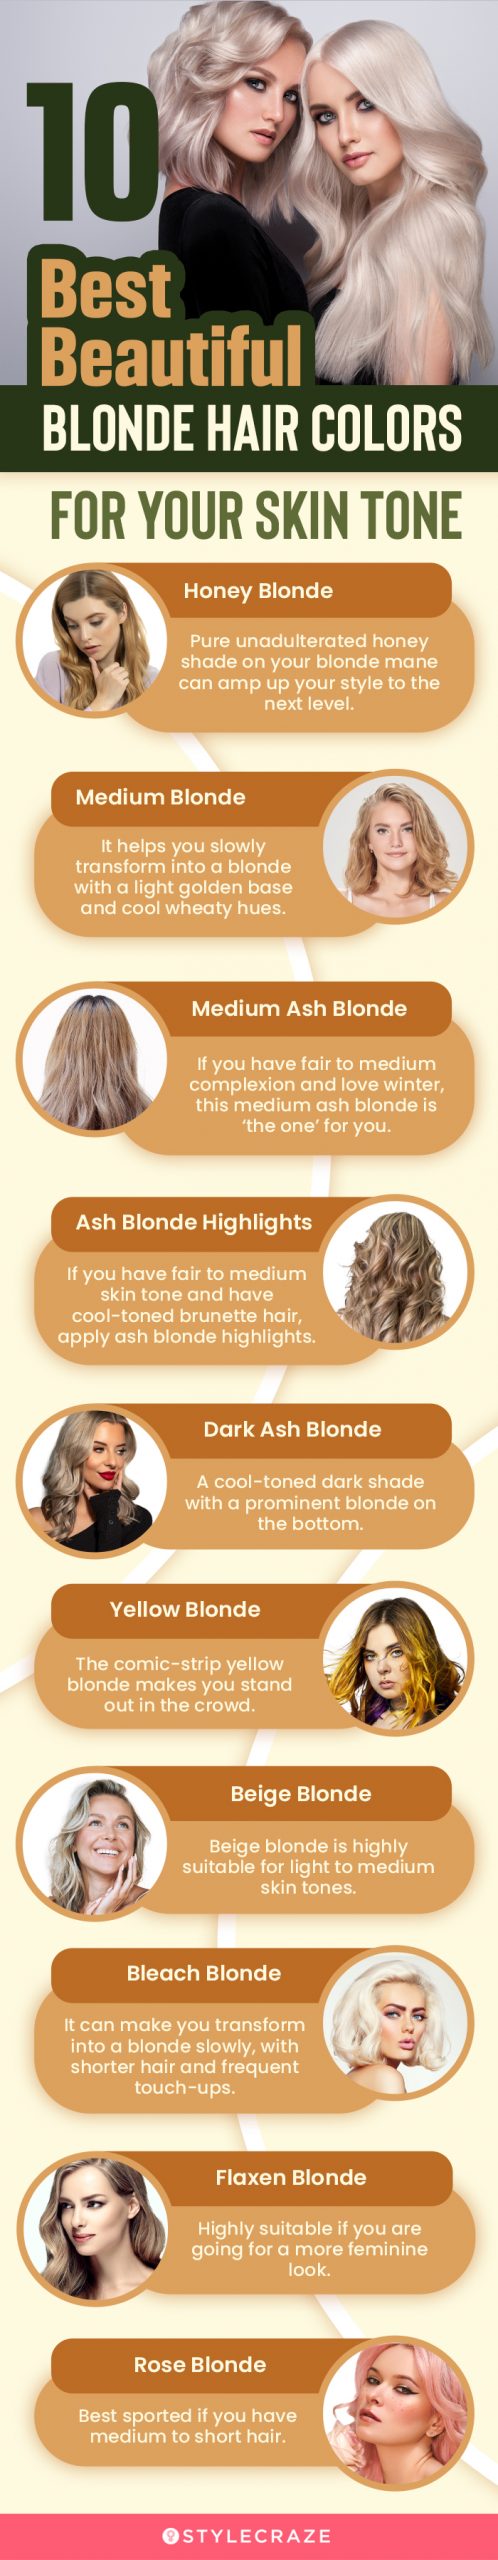 10 best beautiful blonde hair colors for your skin tone (infographic)